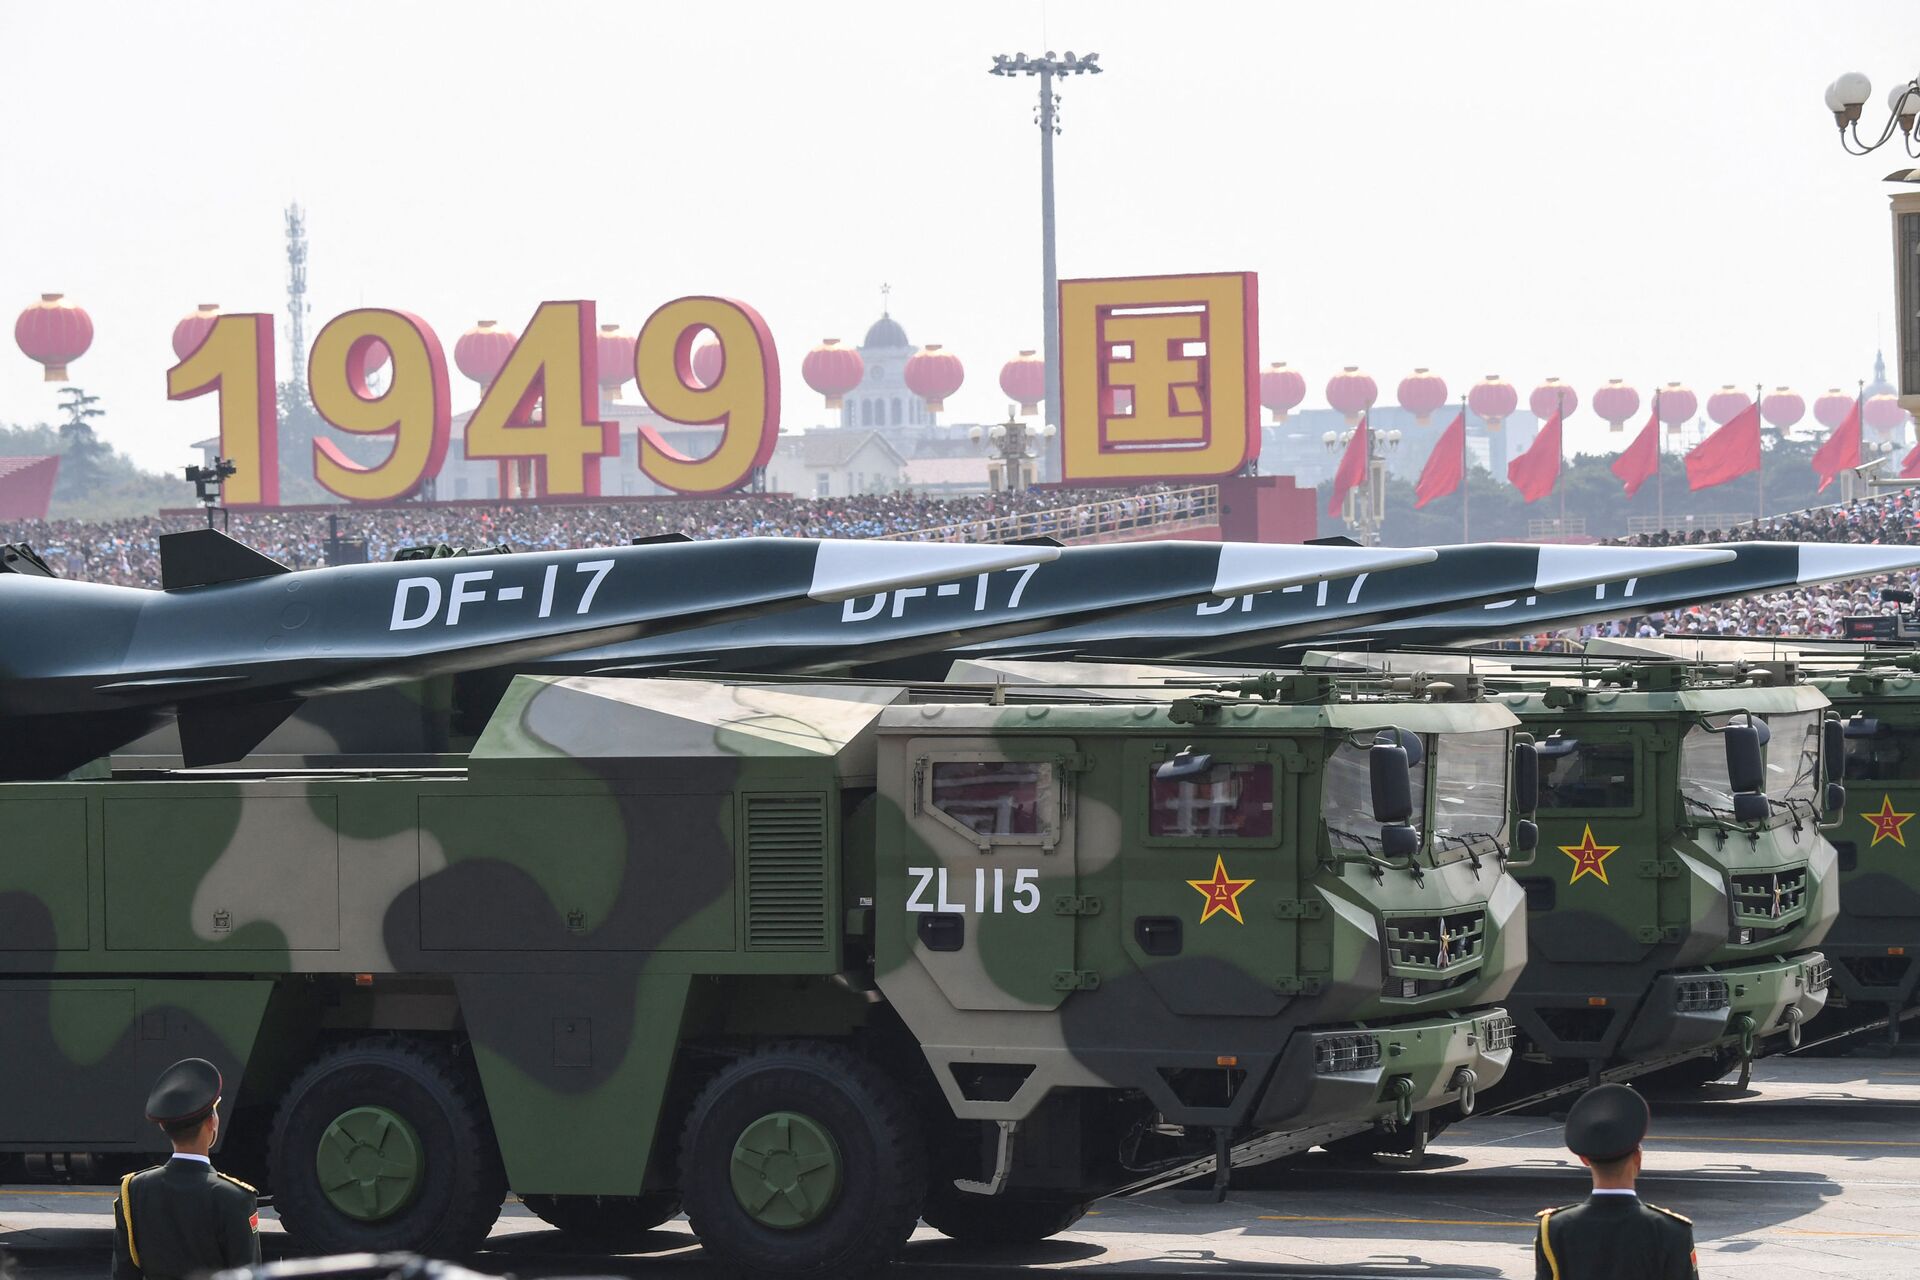 Military vehicles carrying DF-17 missiles participate in a military parade at Tiananmen Square in Beijing on October 1, 2019, to mark the 70th anniversary of the founding of the People’s Republic of China - Sputnik International, 1920, 22.10.2021